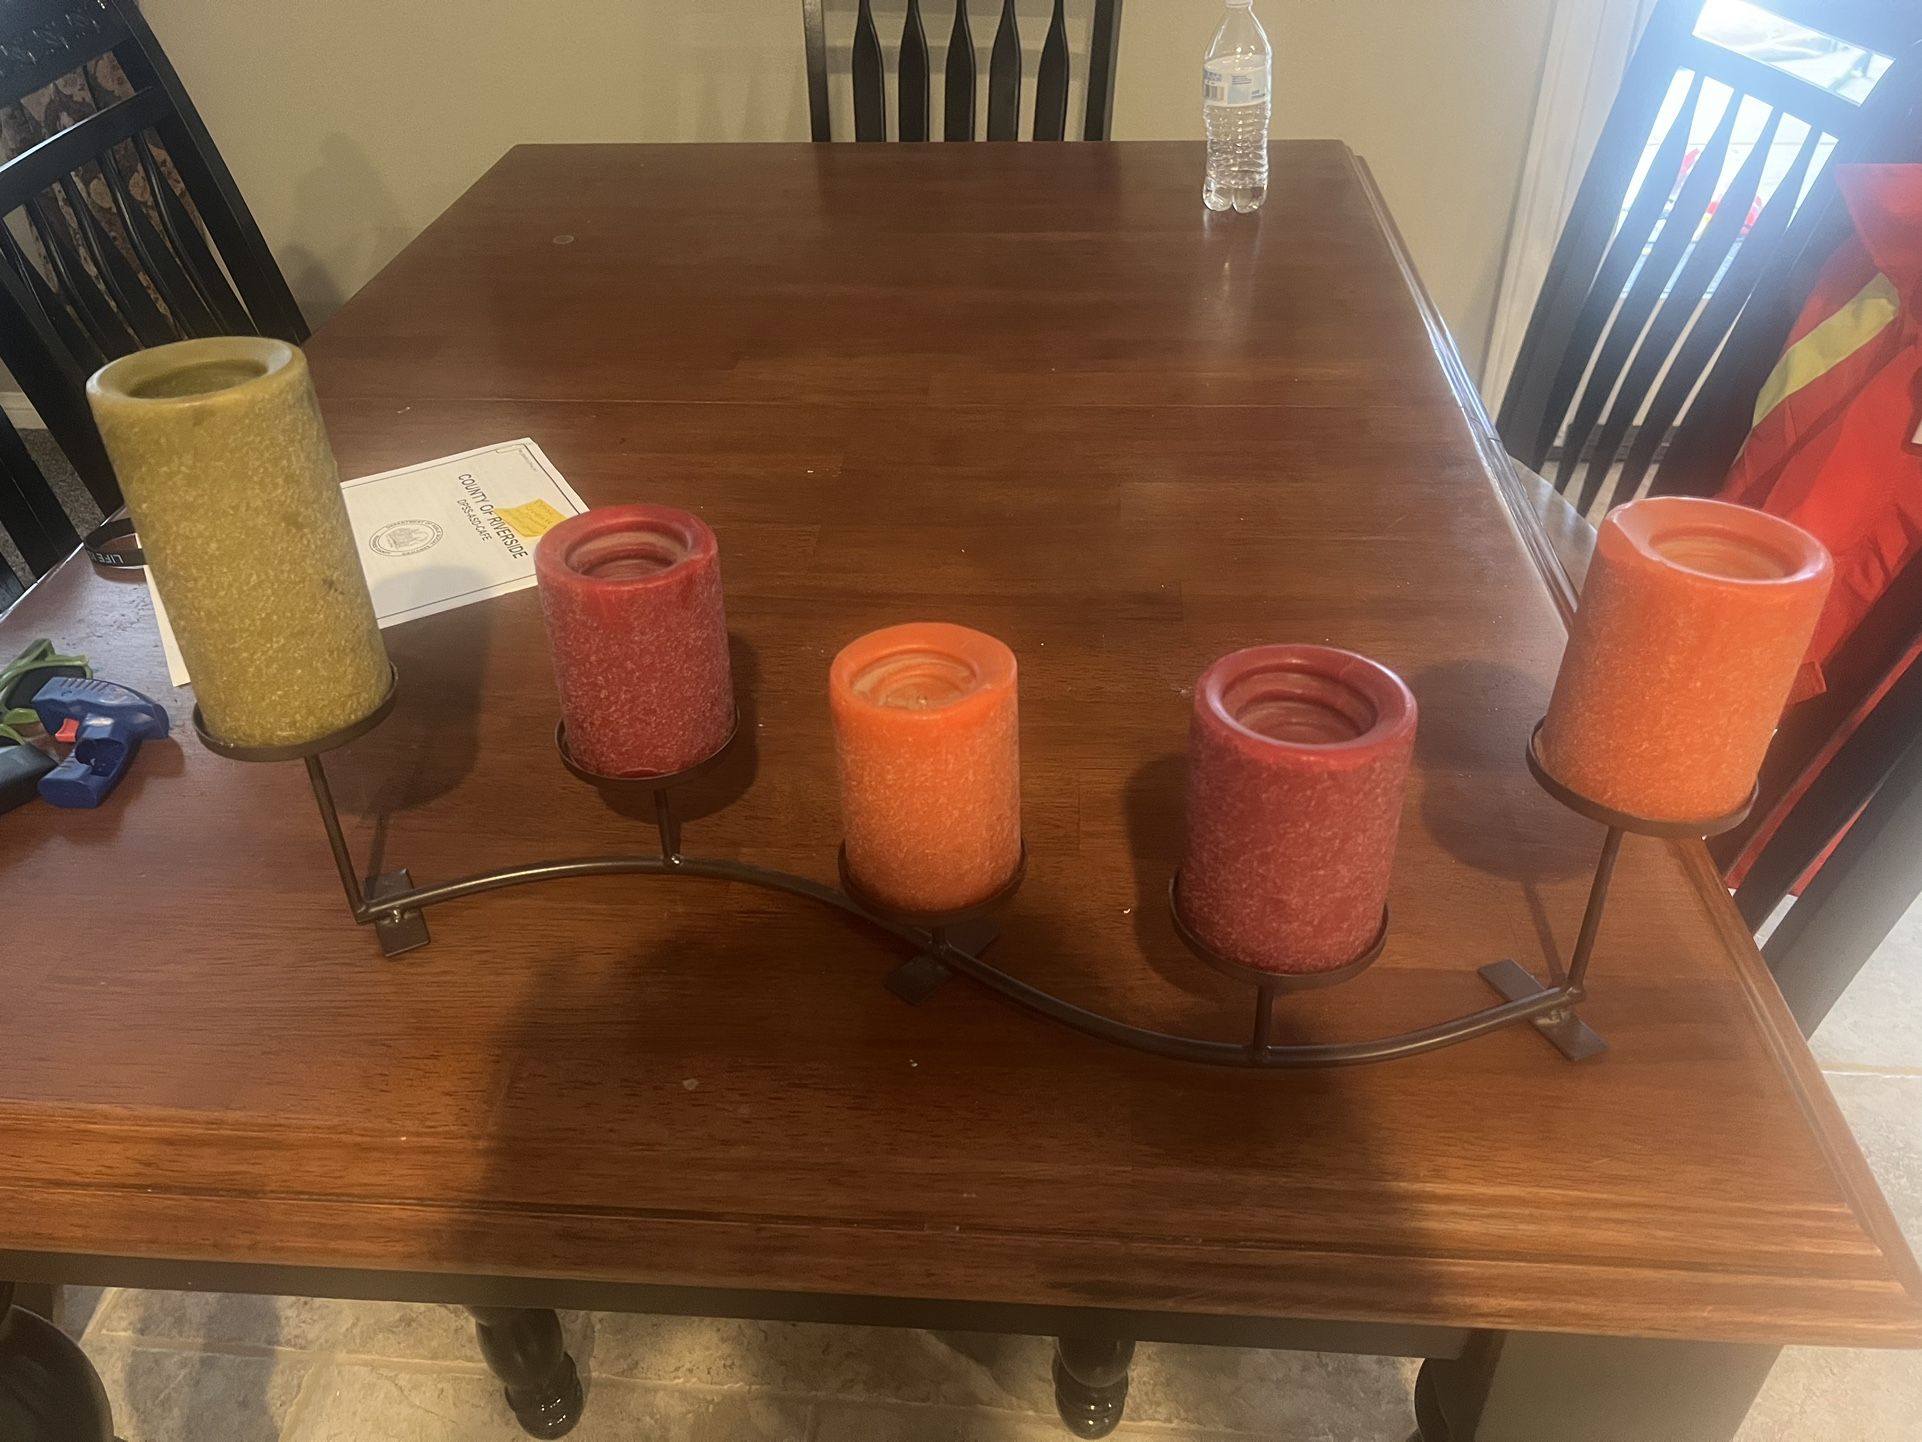 Decorative Candle Holder (5 Candles)